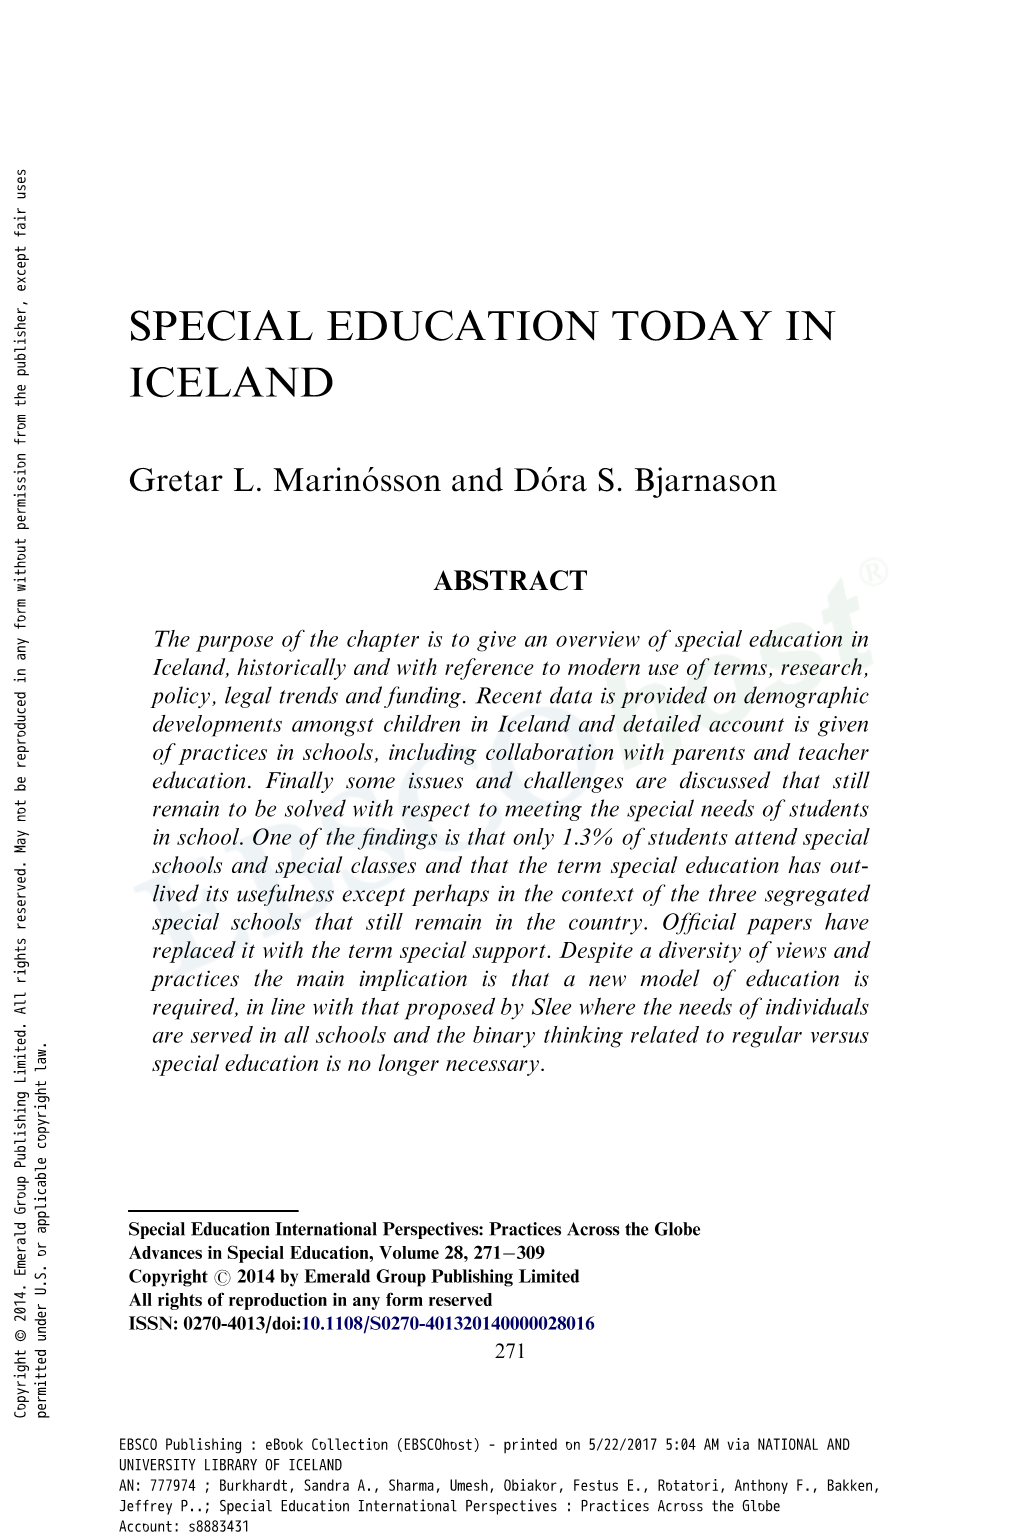 Special Education Today in Iceland